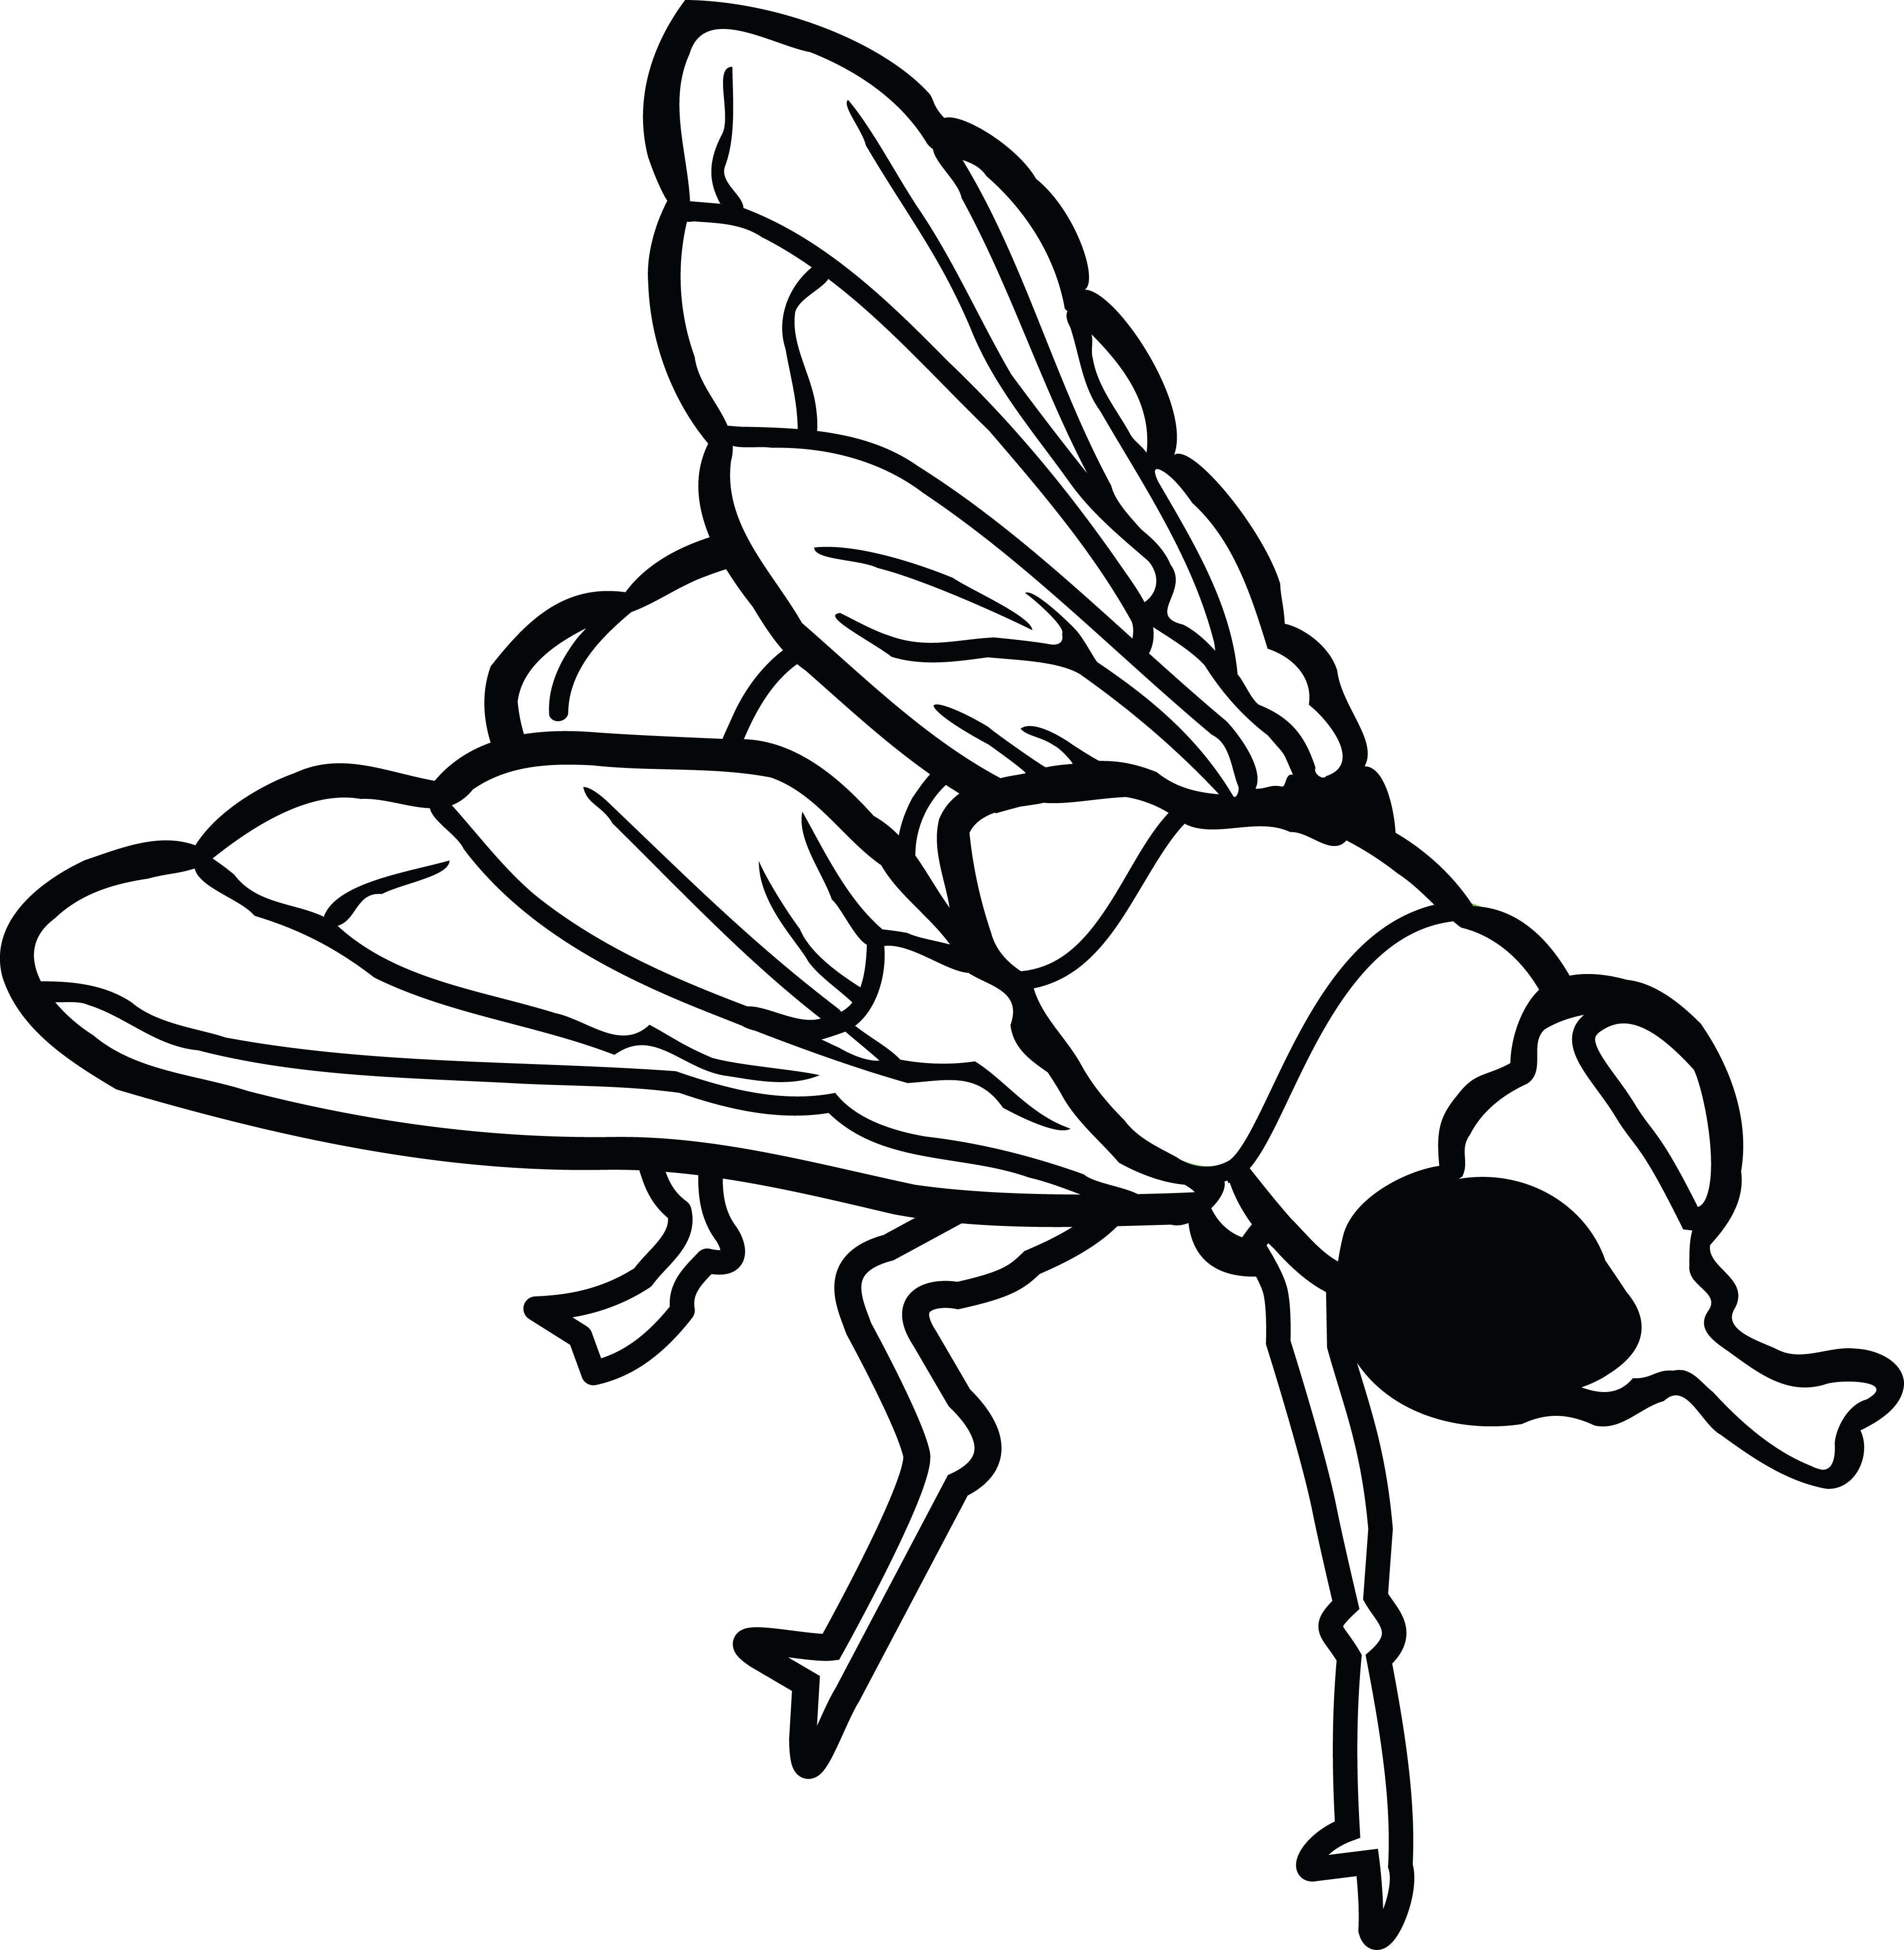 HD Free Clipart Of A Fly.